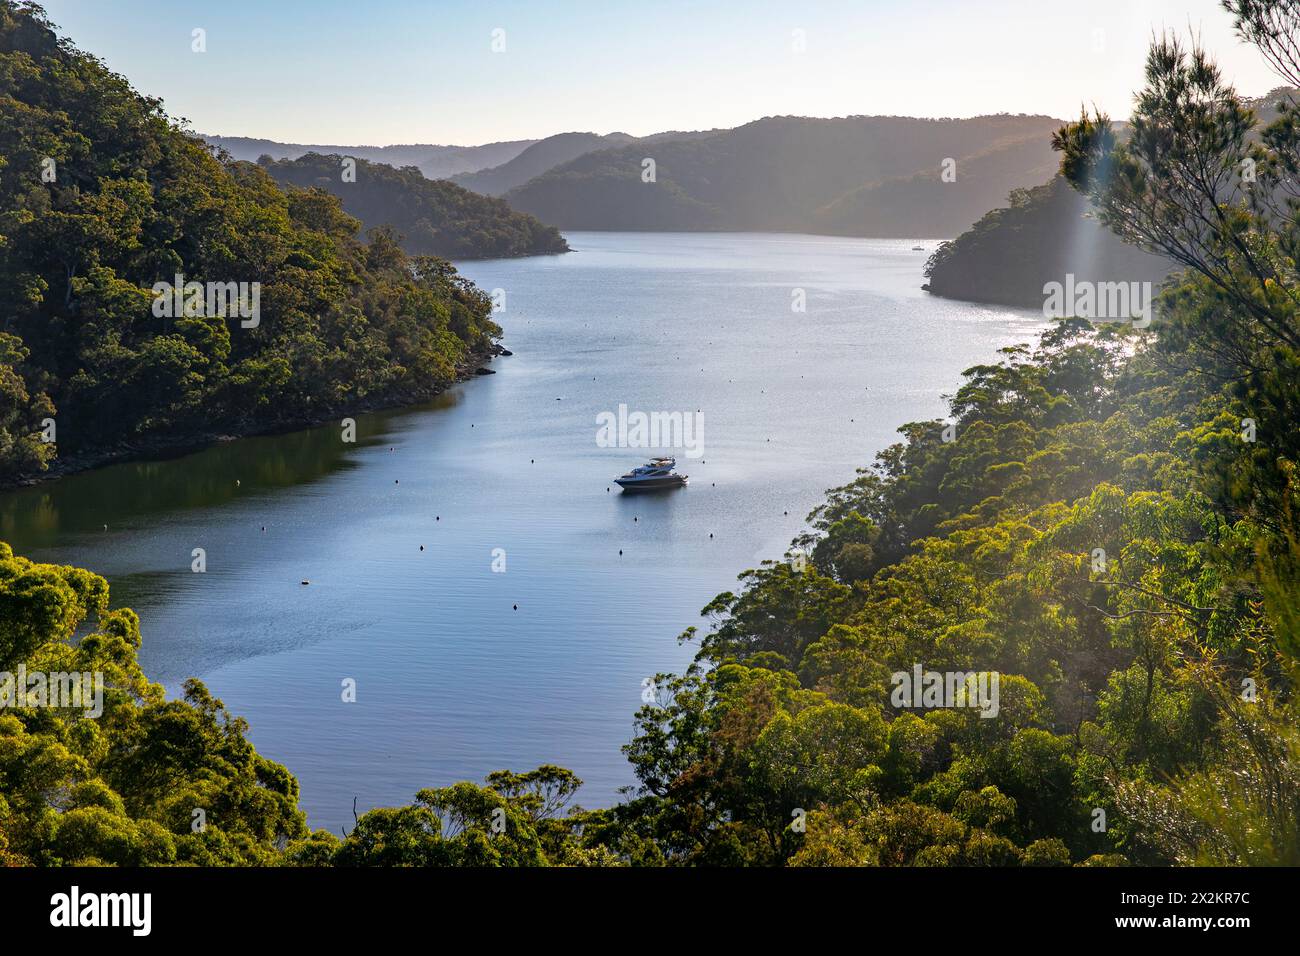 America bay on the Hawkesbury River, viewed from America bay track in Ku-ring-gai chase national park, Sydney,NSW,Australia Stock Photo